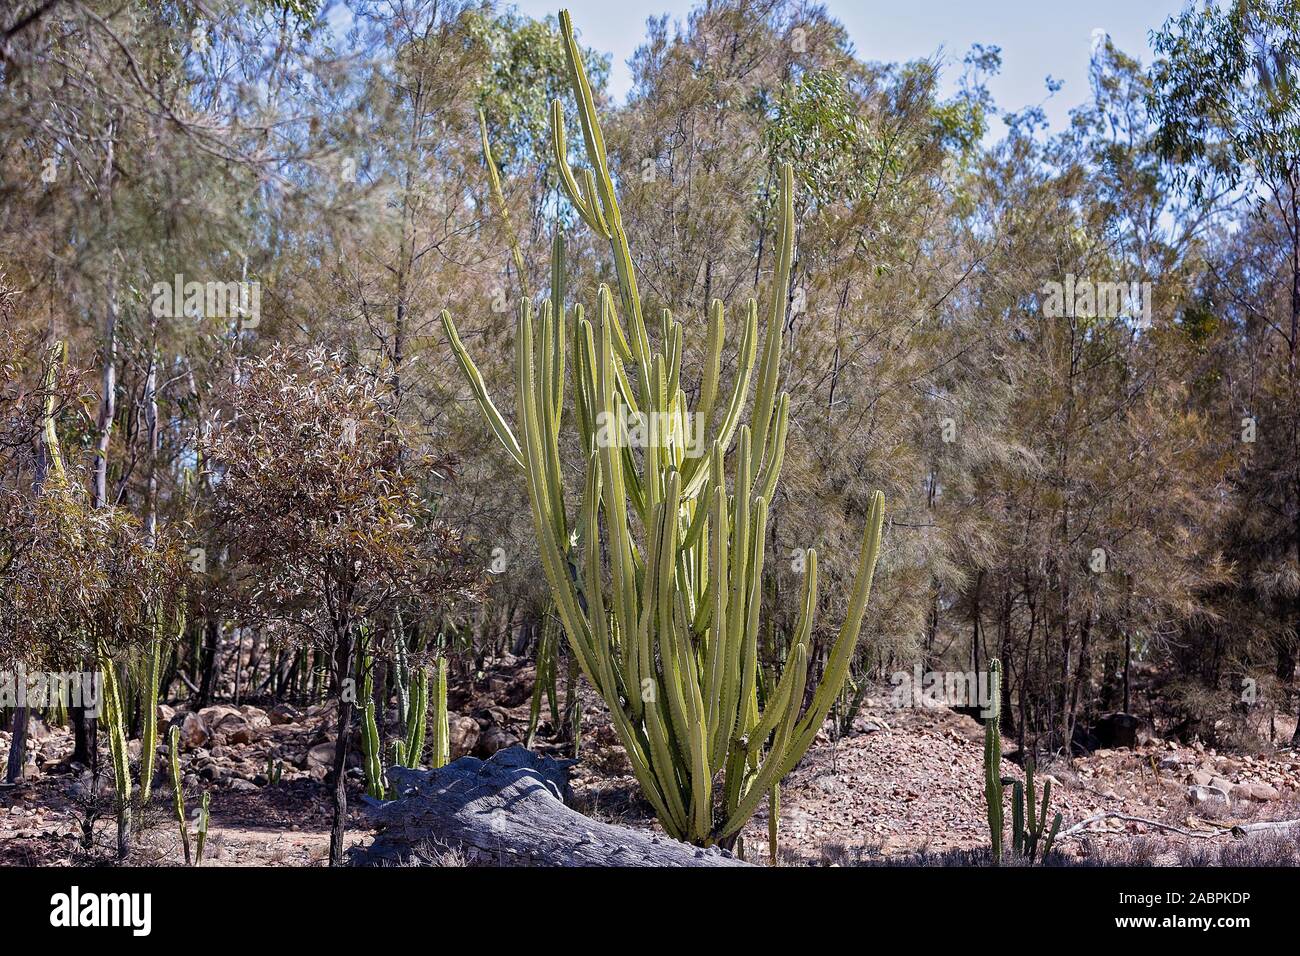 Invasive prickly pear infestation damaging the environment around the gem fields in central Queensland Australia Stock Photo